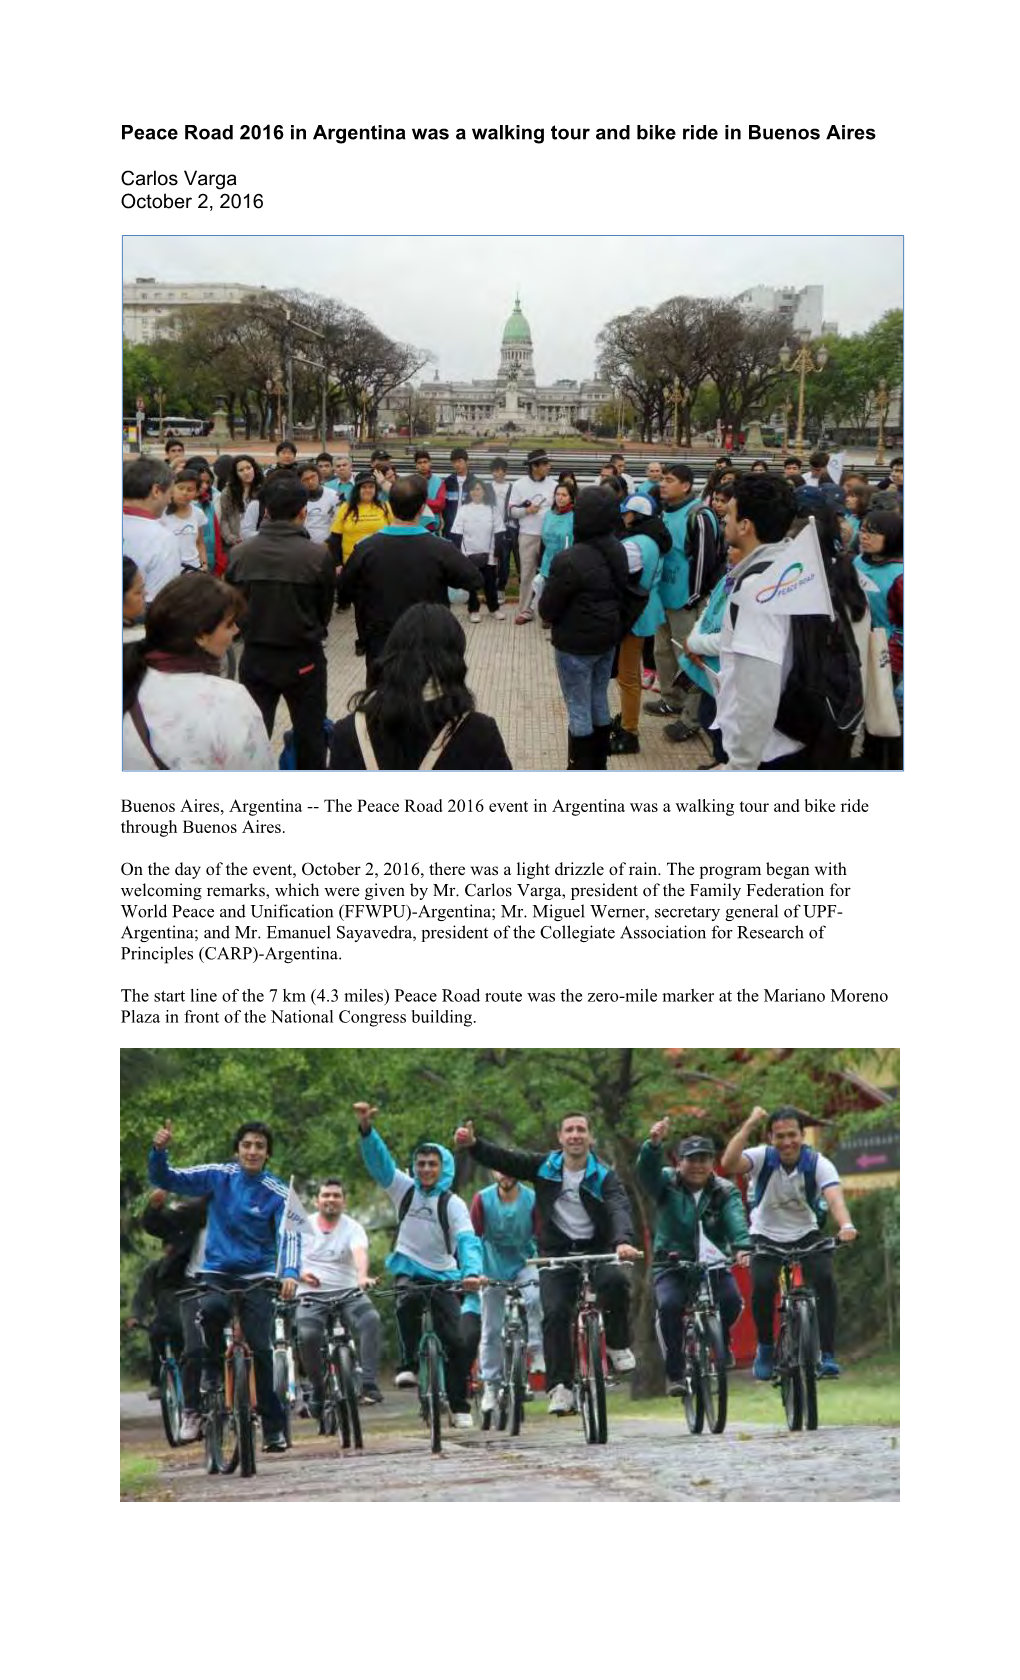 Peace Road 2016 in Argentina Was a Walking Tour and Bike Ride in Buenos Aires